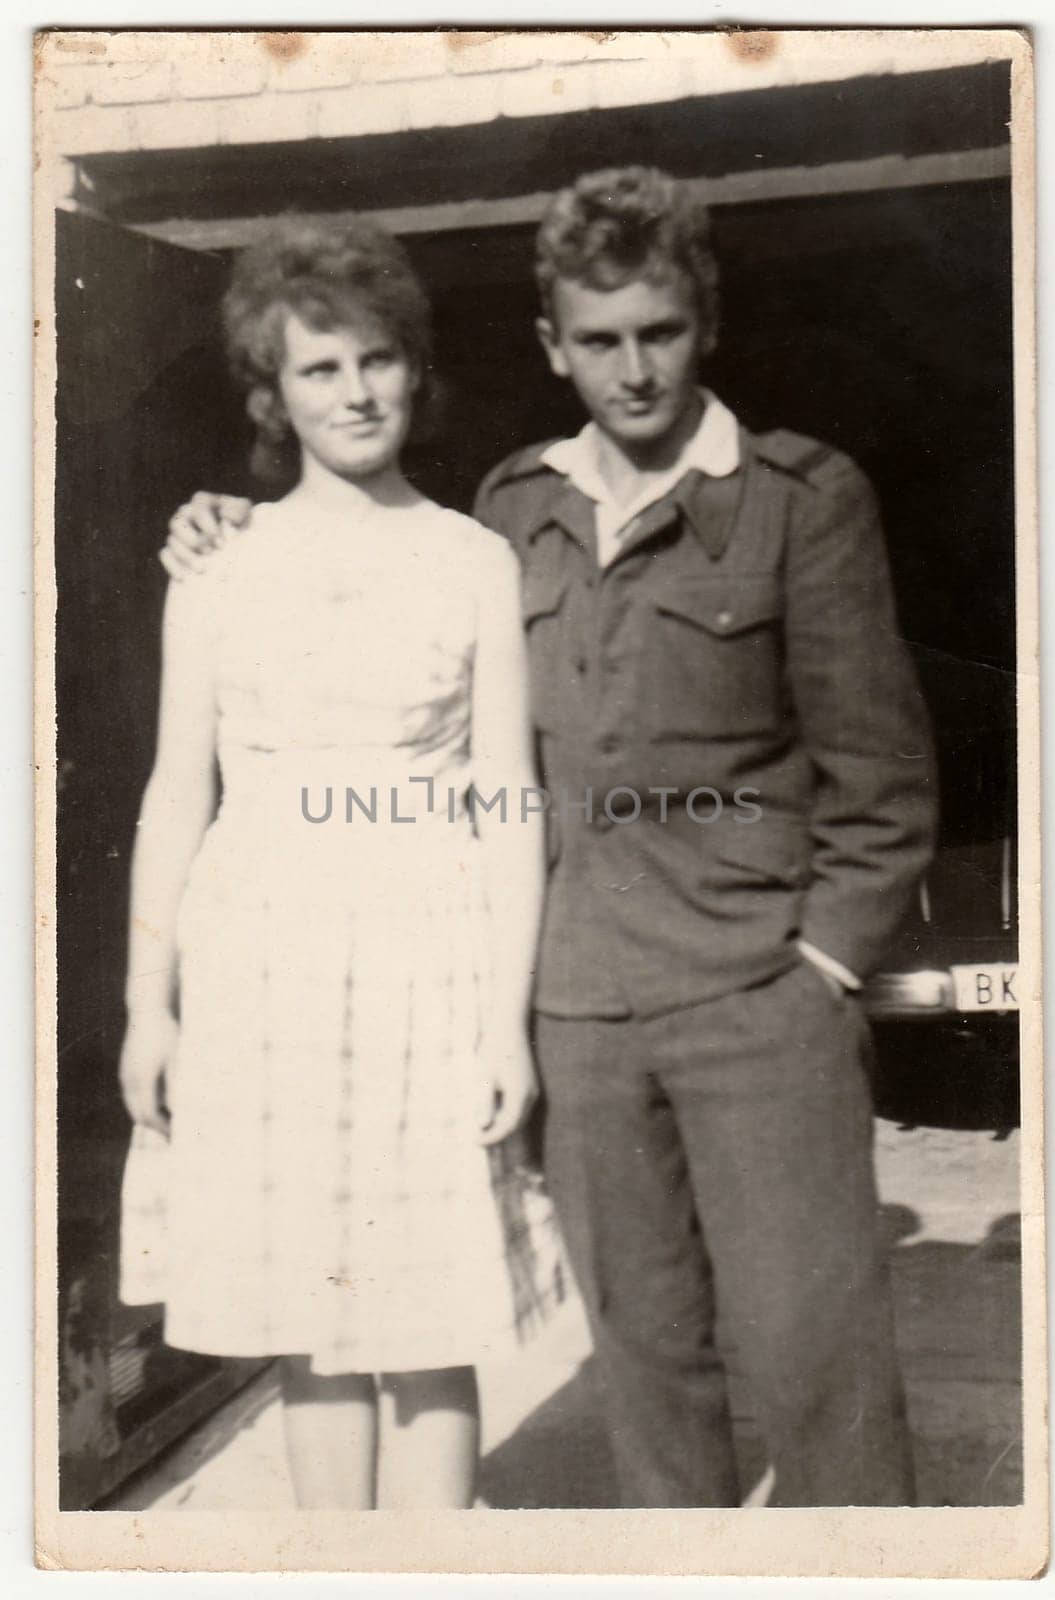 An antique Black & White photo shows soldier and his girlfriend. by roman_nerud